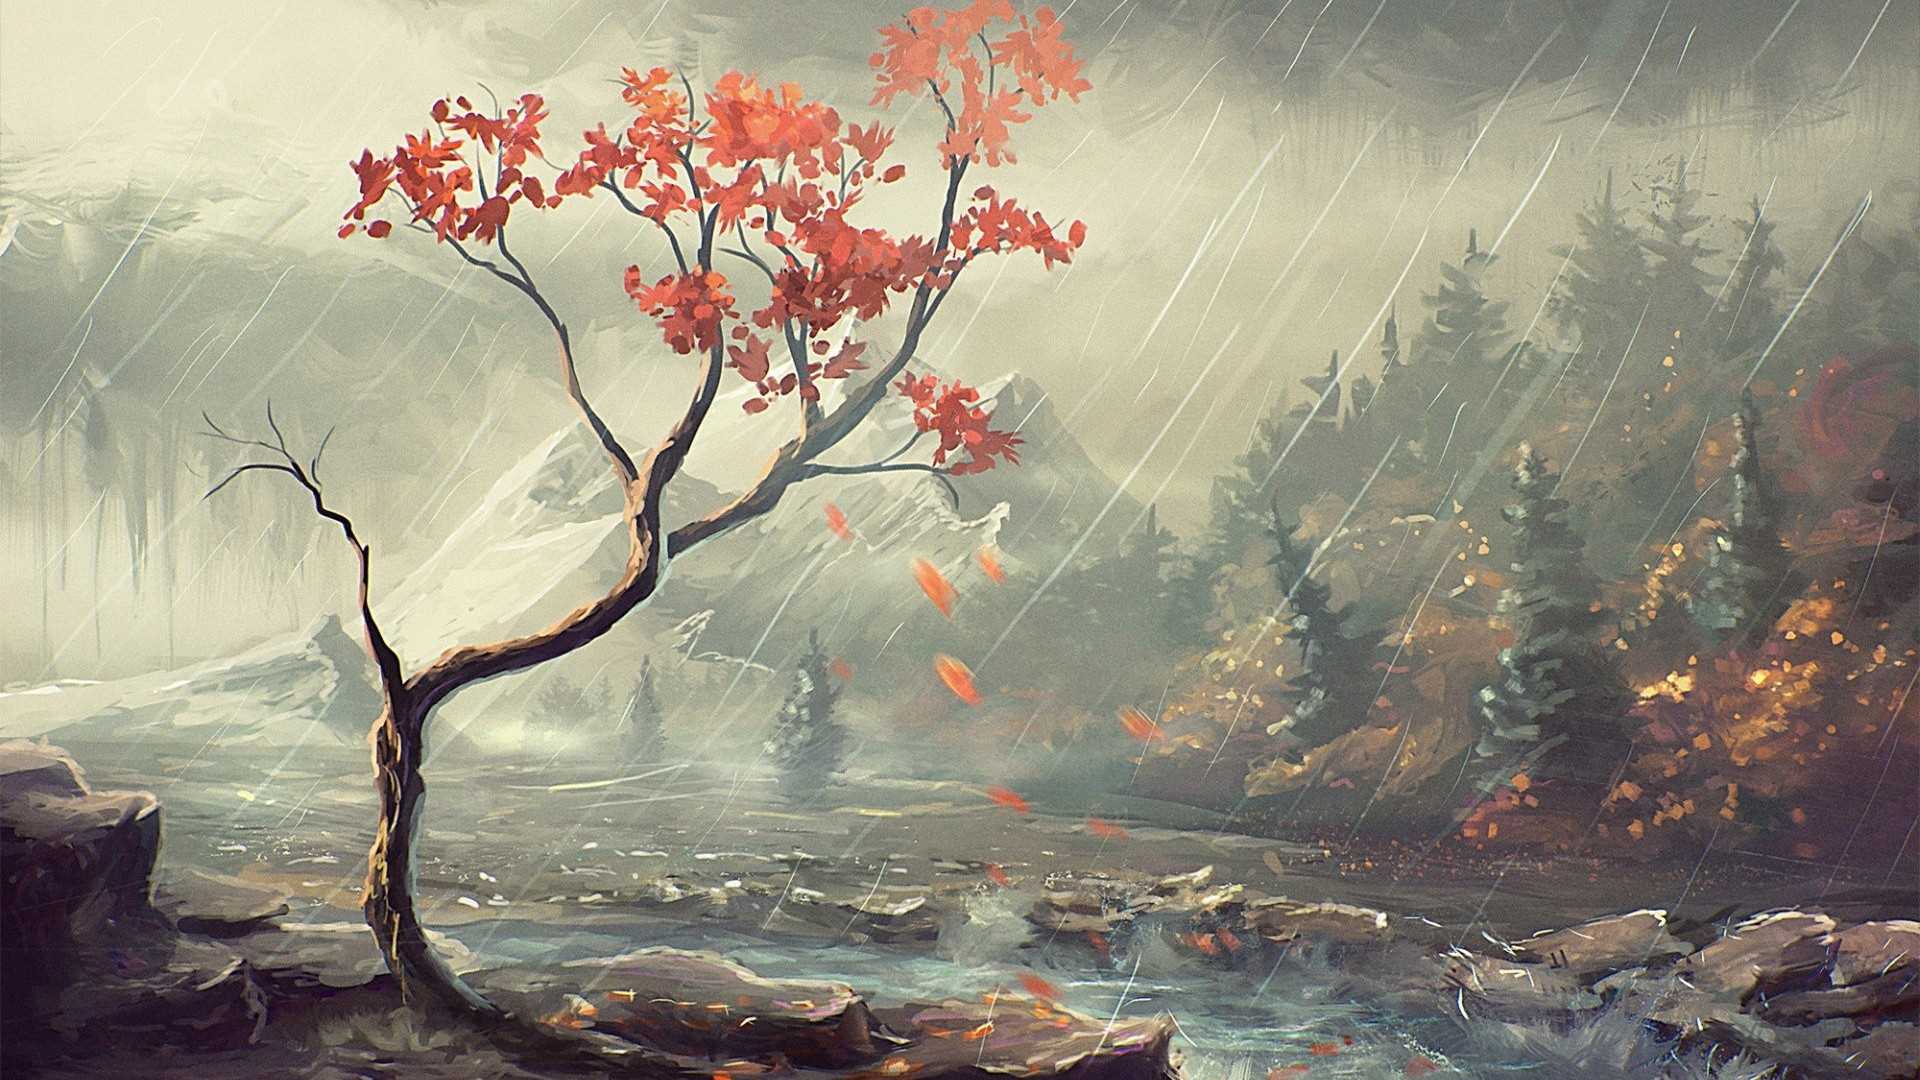 Colorful Tree Painting Wallpaper If The Link Is Broken